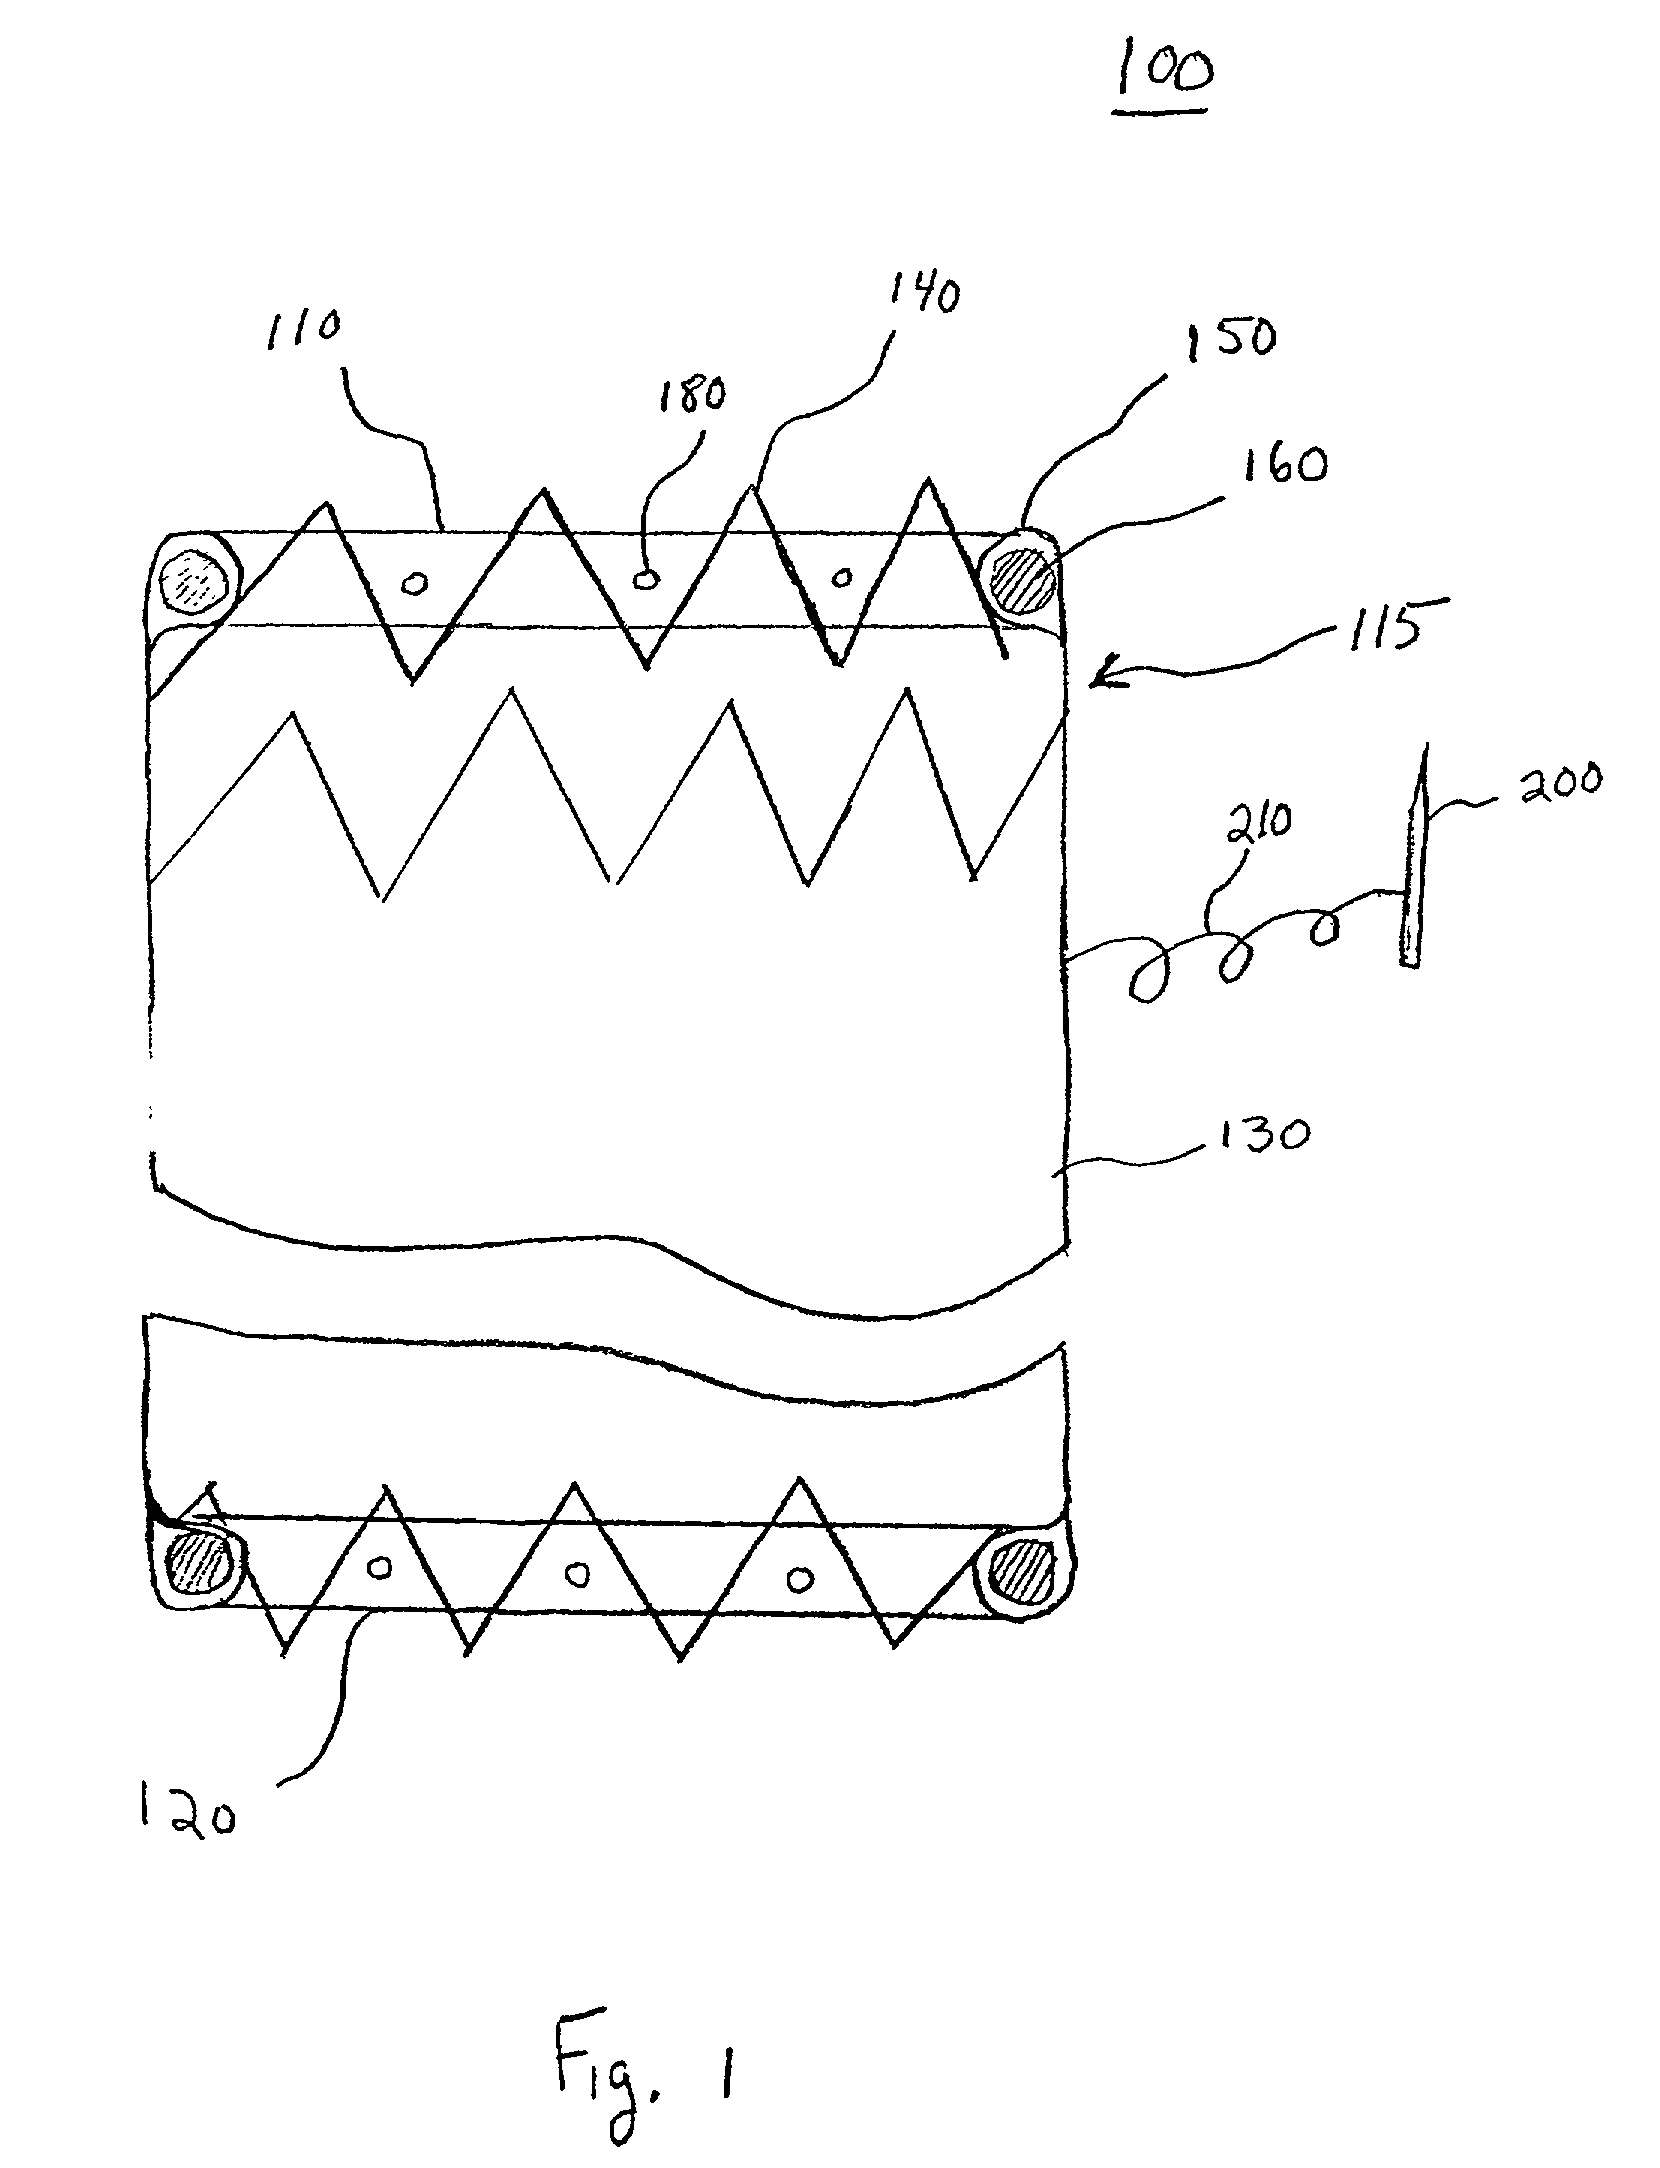 Implant having improved fixation to a body lumen and method for implanting the same